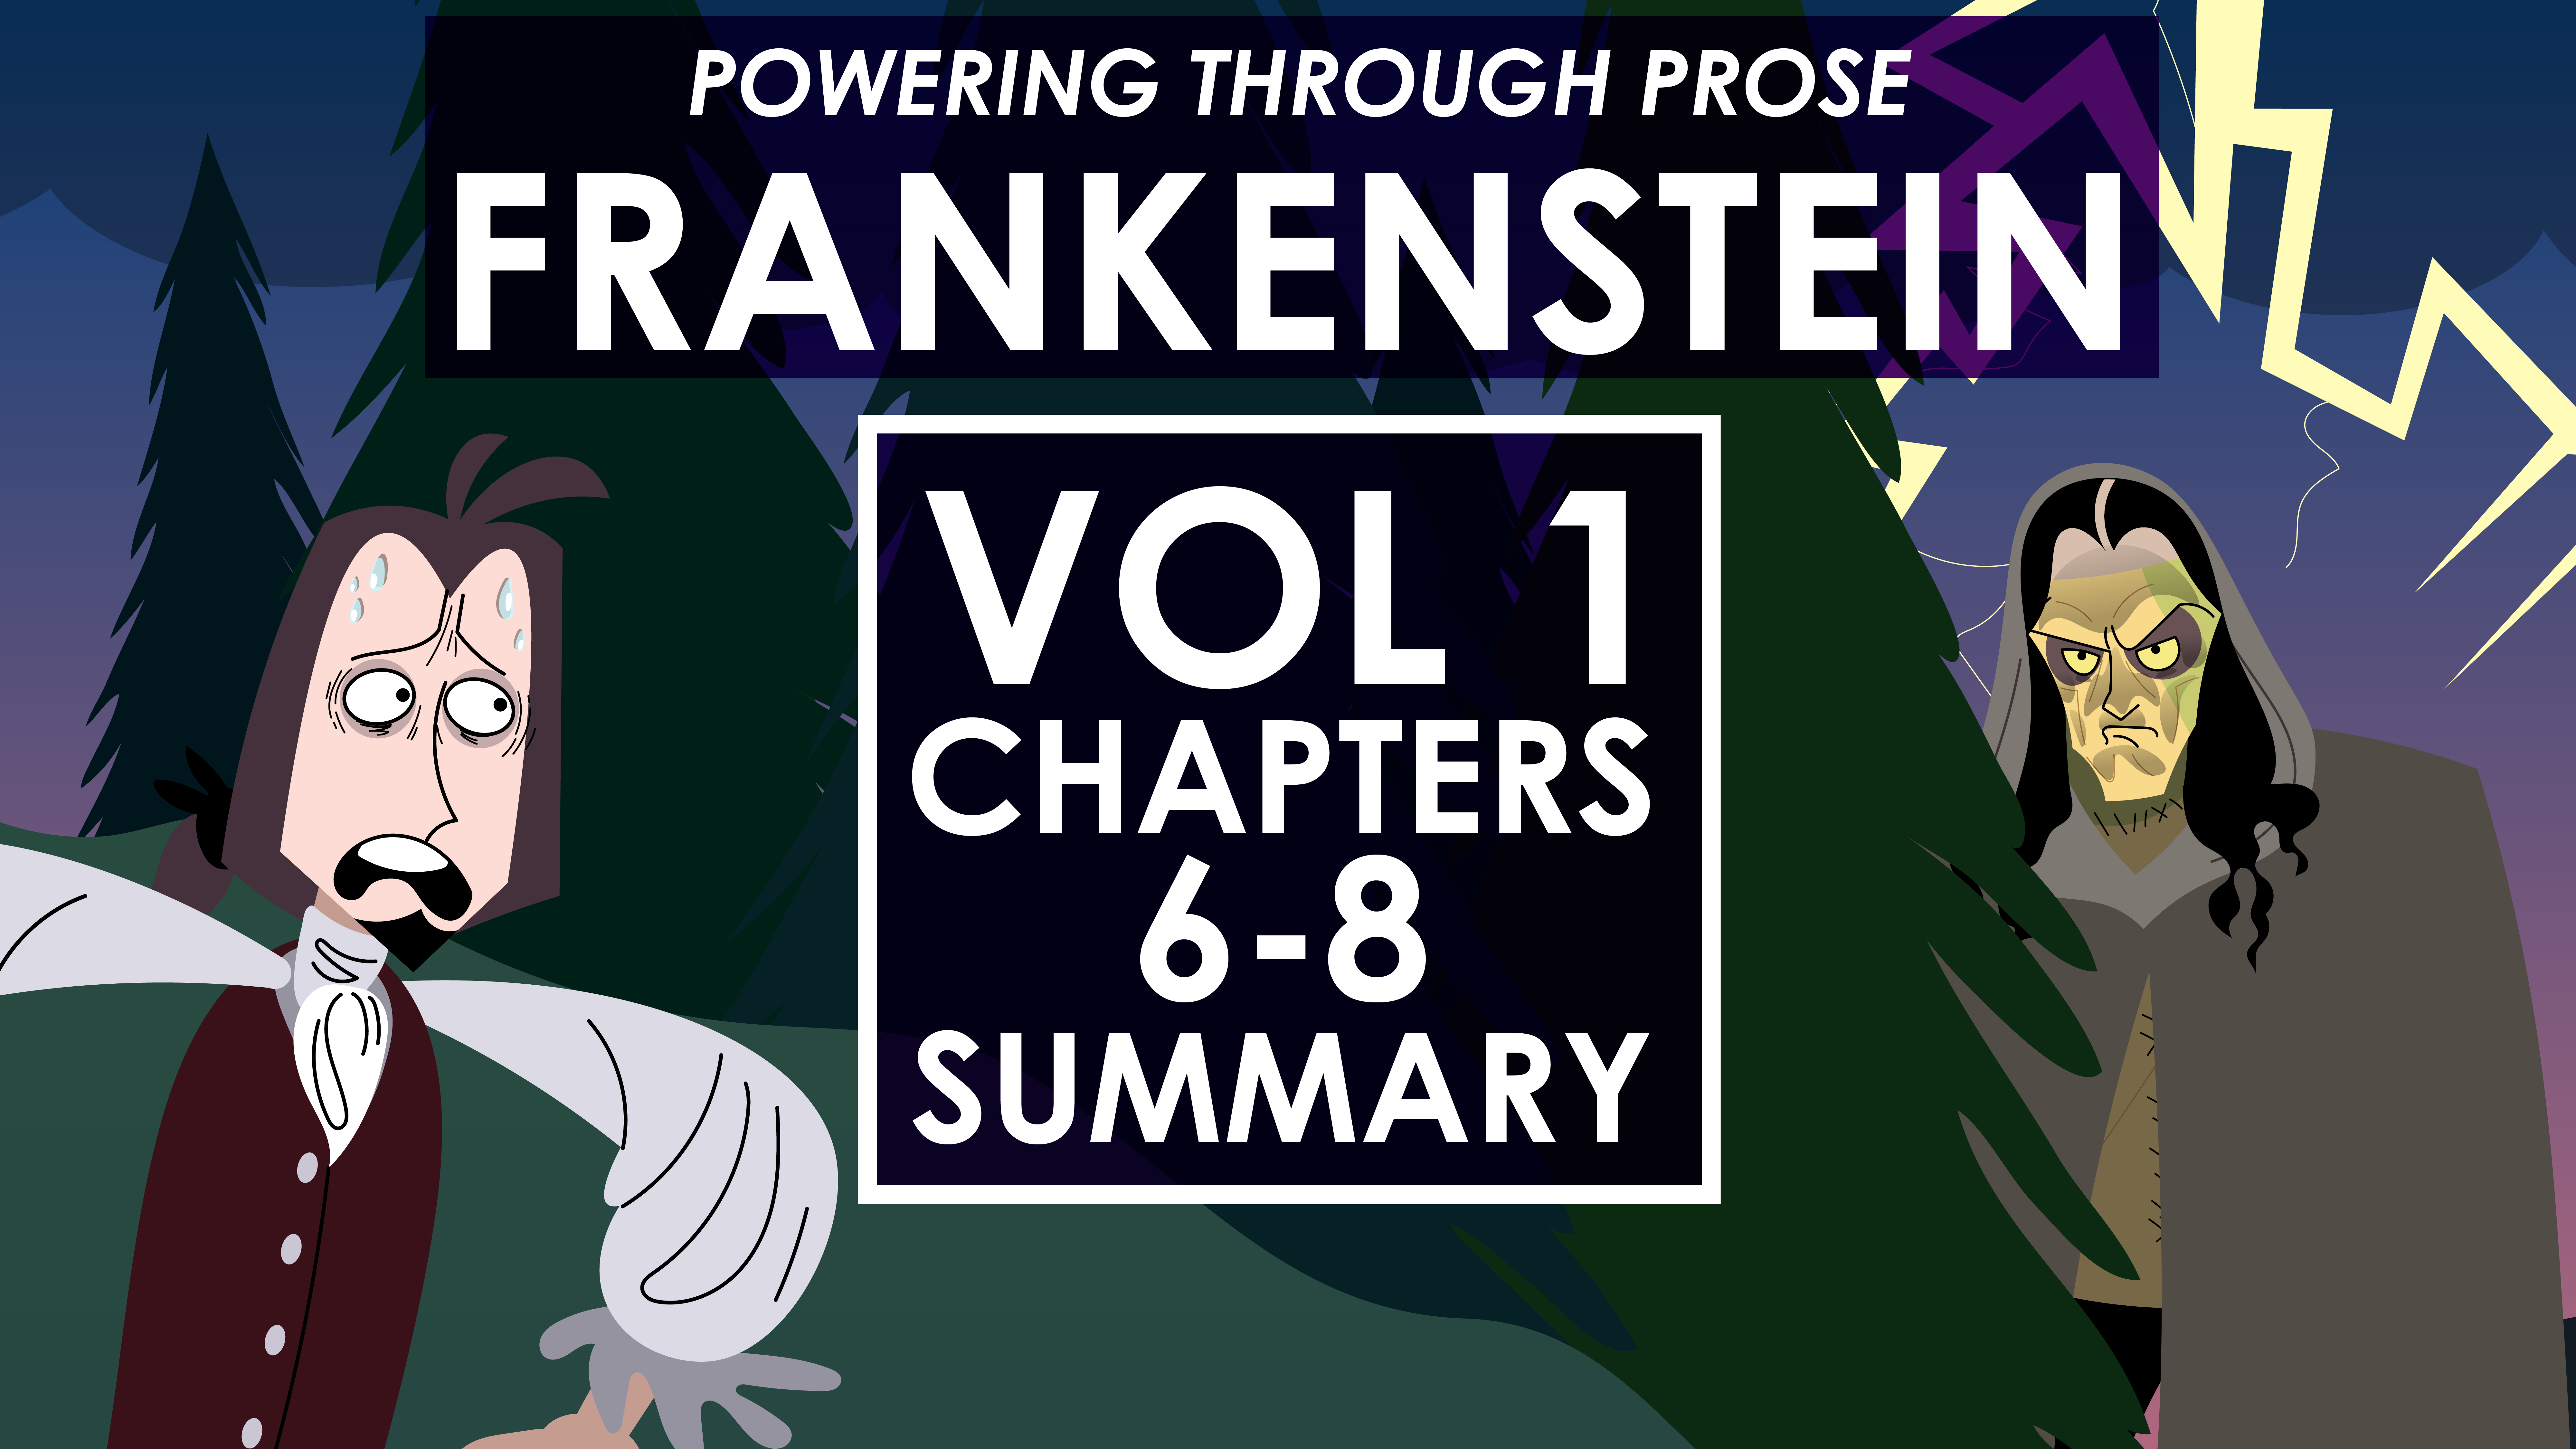 Frankenstein - Mary Shelley - Volume 1 Chapters 6-8 - Powering Through Prose Series